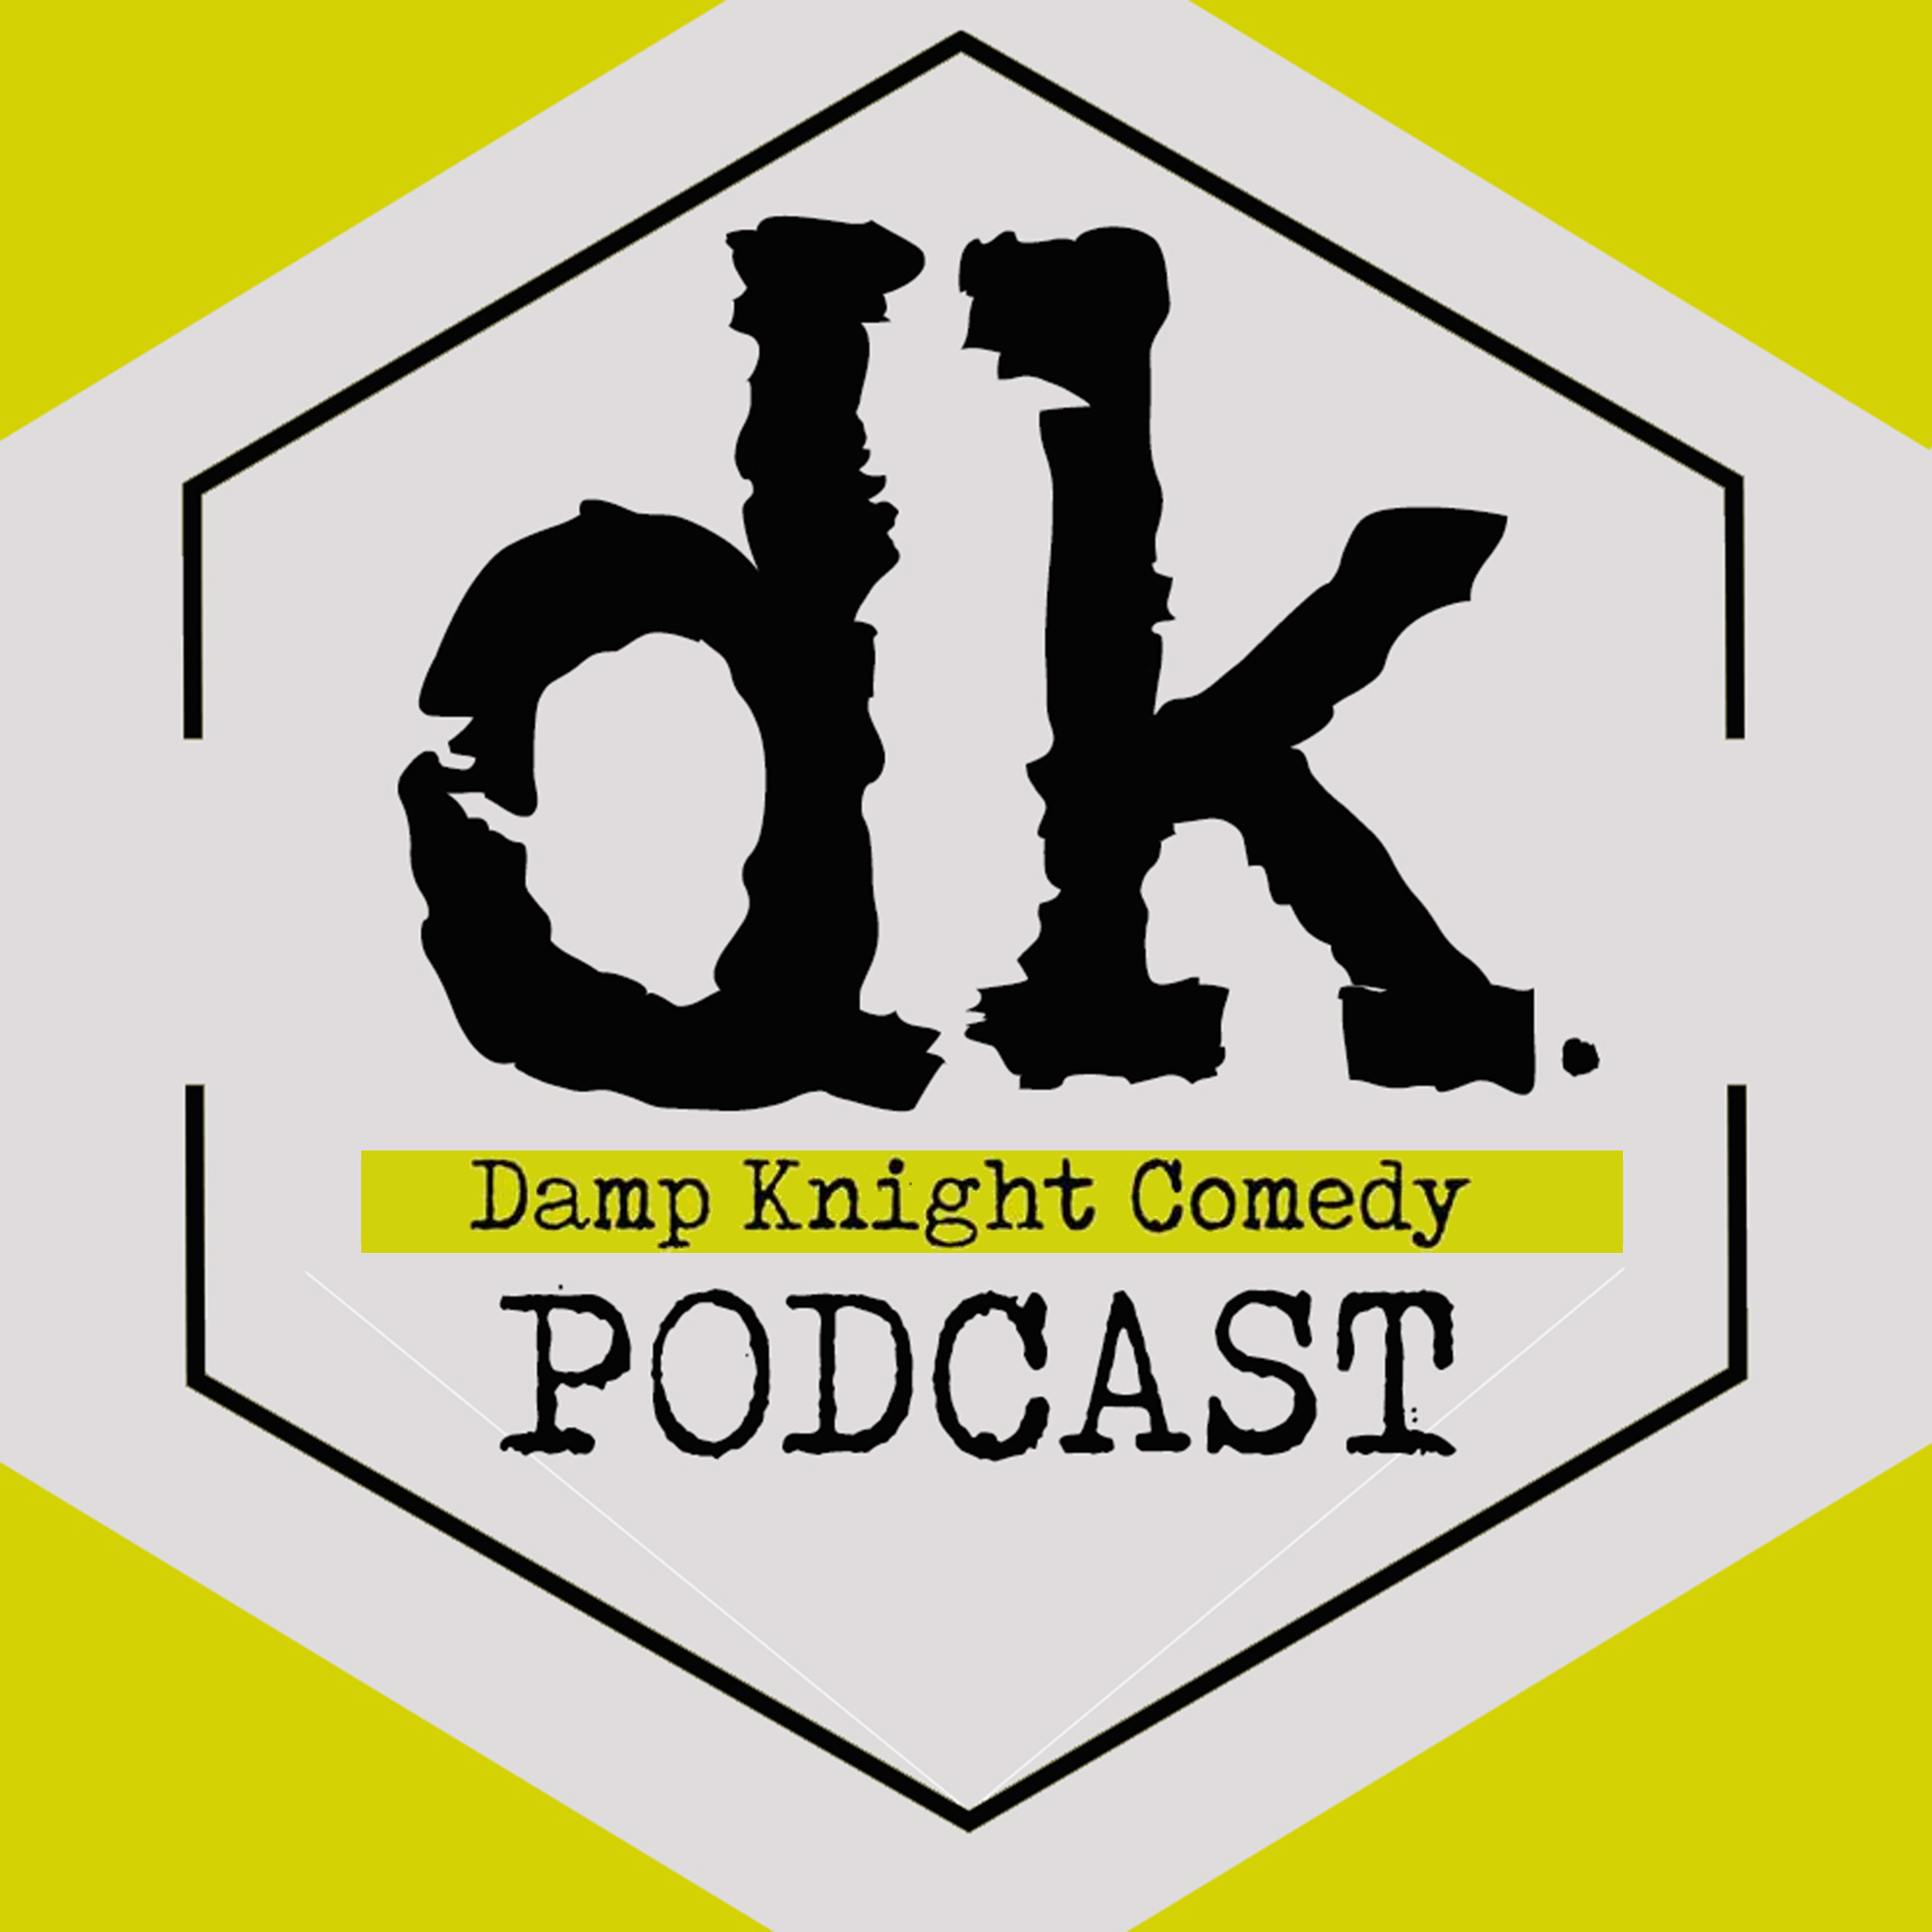 DK Podcast EP 46 - TAoBKMaStJC in Behind the Deli Counter OR The Crimes of Kennley Morgan